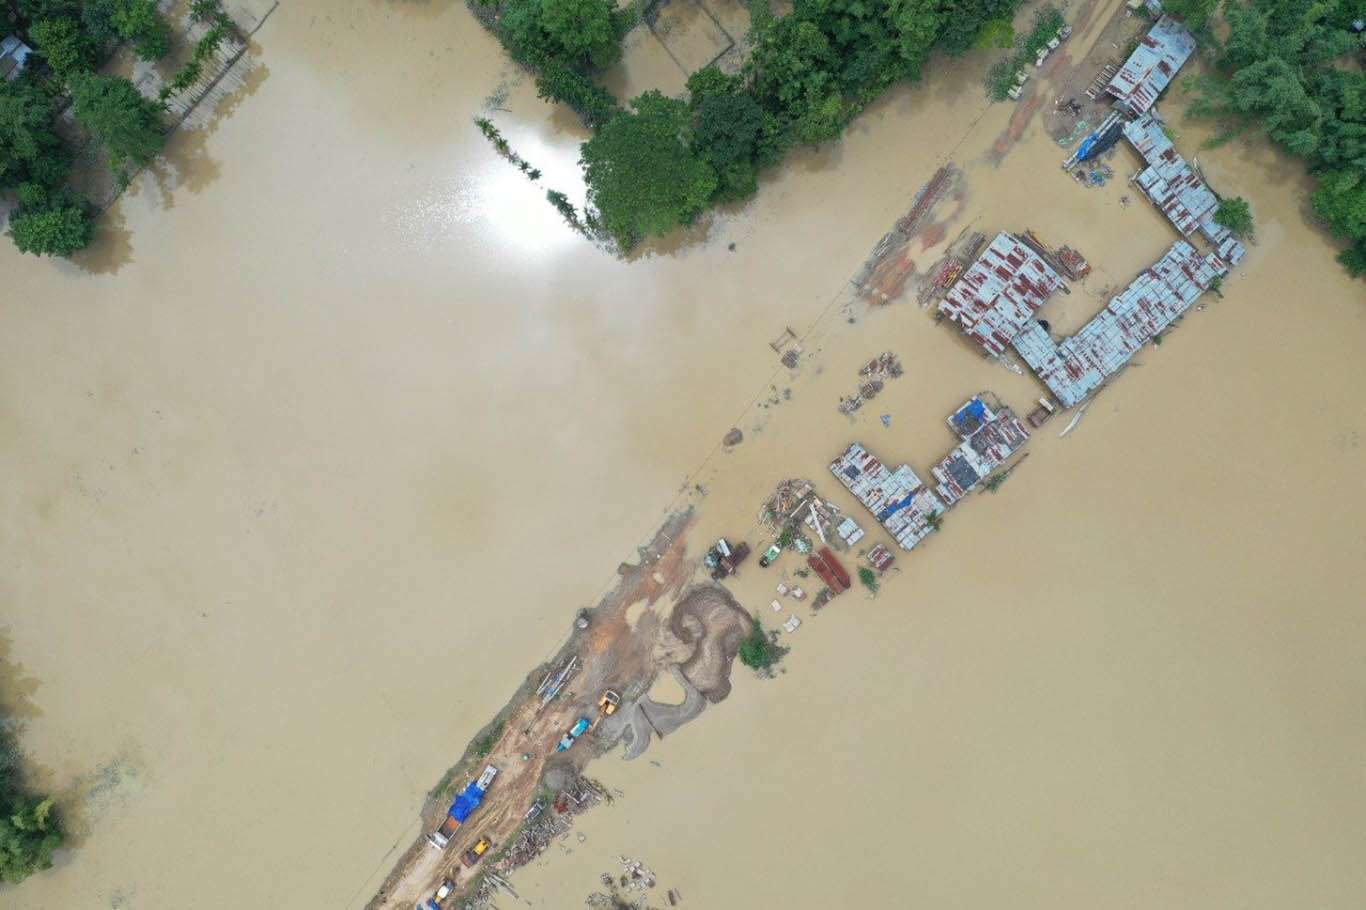 Death toll from floods rises to 174 in India’s Assam